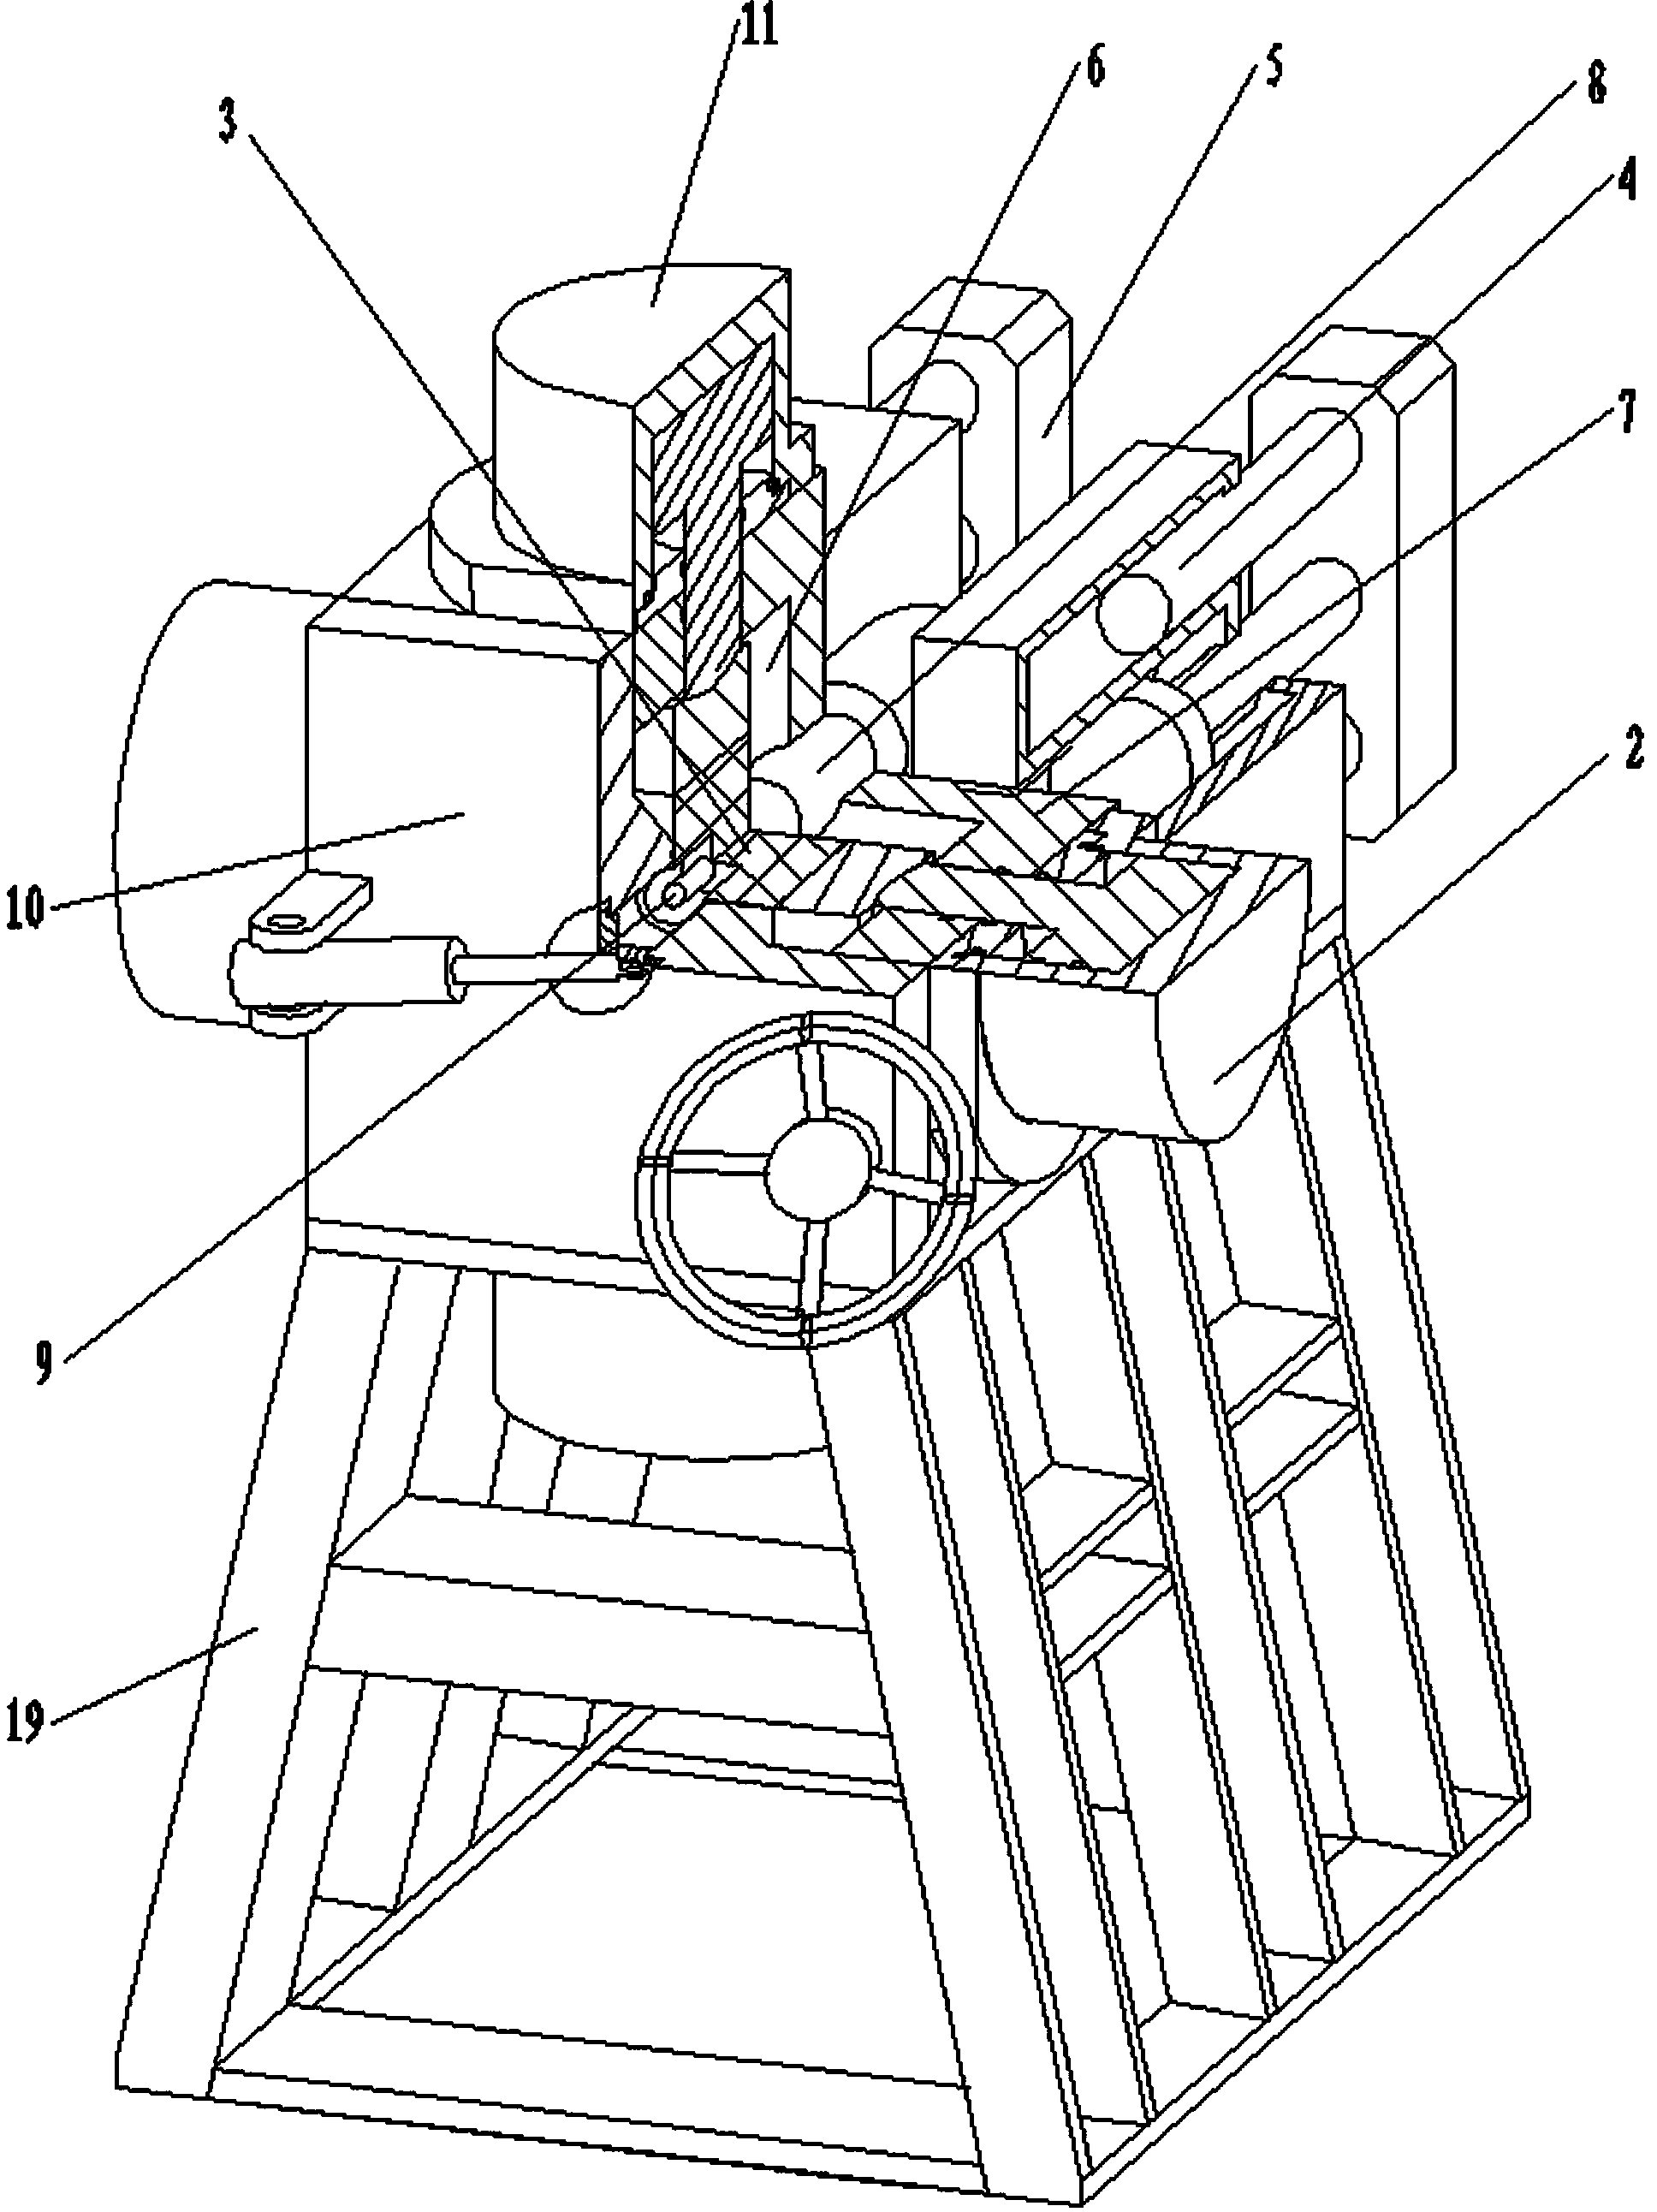 Coal mine dynamic disaster multi-parameter coupling and determining device